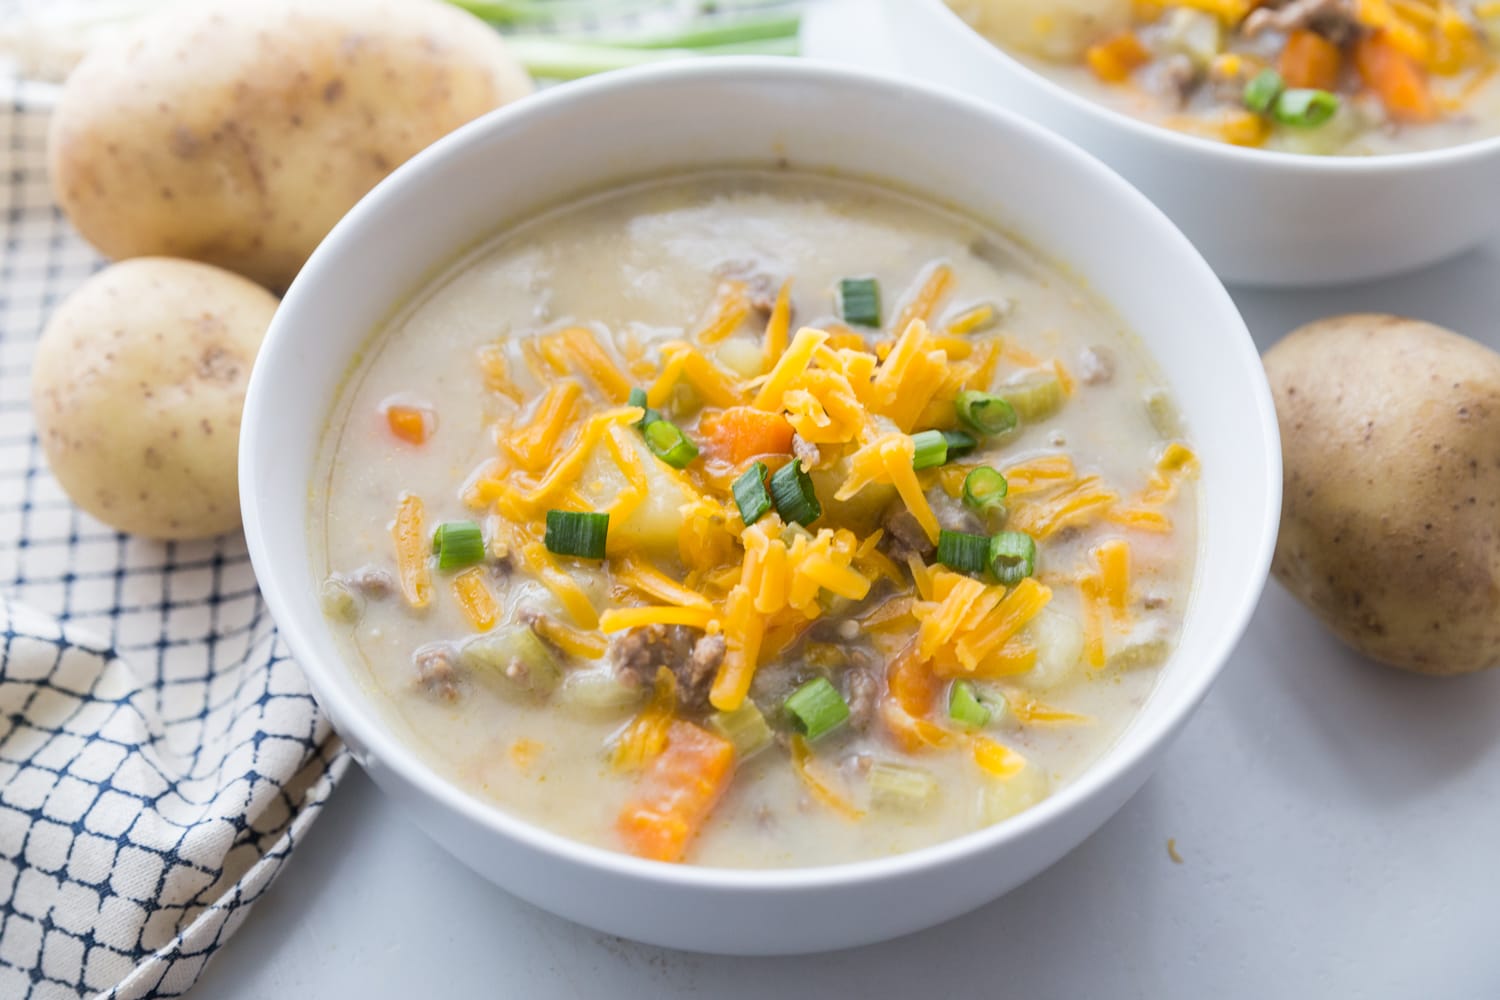 https://confessionsofafitfoodie.com/wp-content/uploads/2019/10/Cheeseburger-Soup-24.jpg